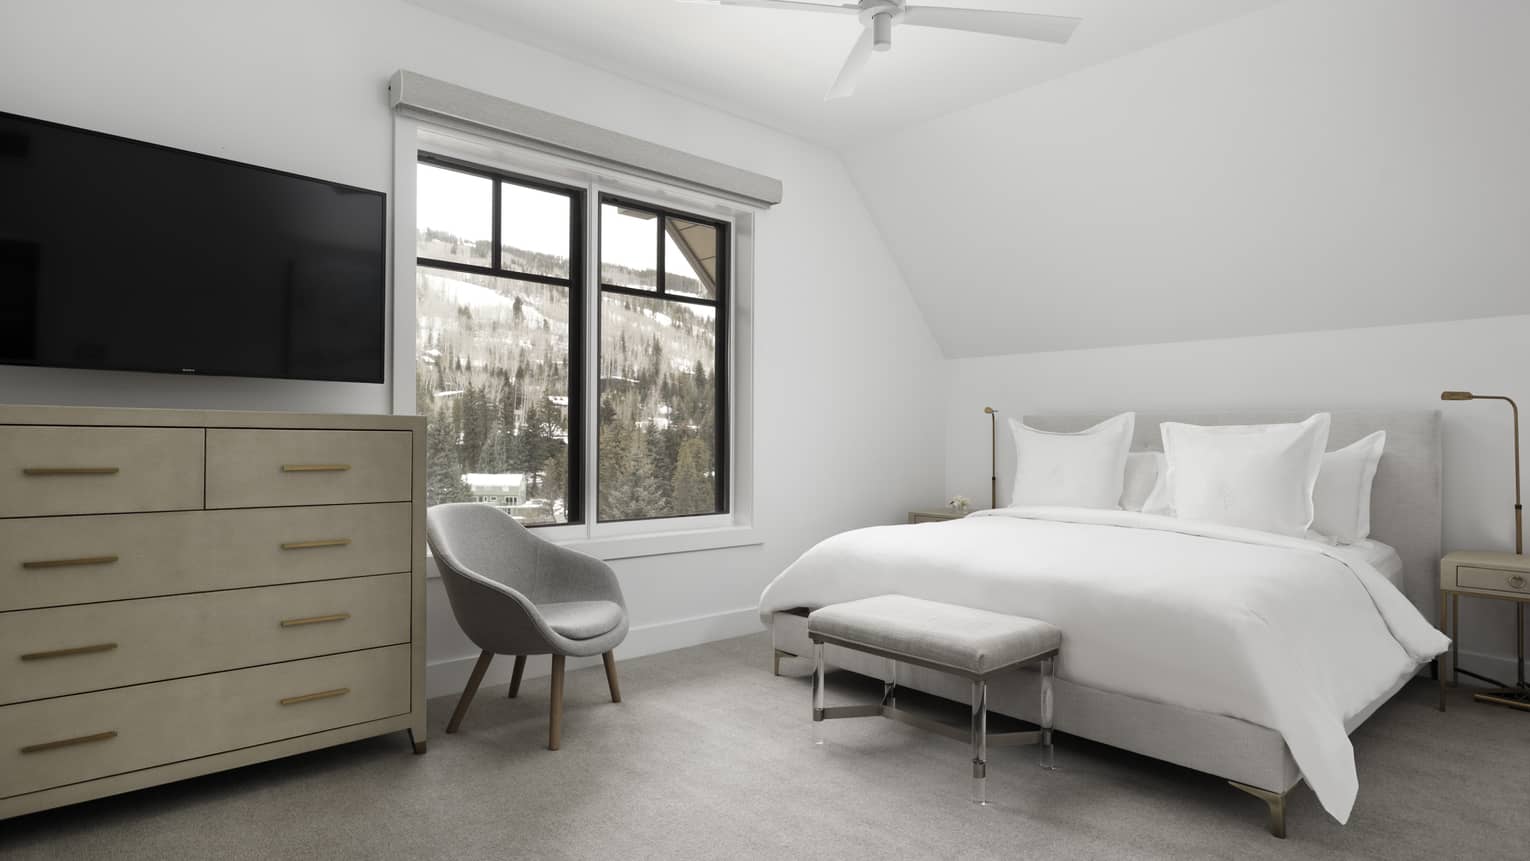 Bedroom with white walls, white king bed, light grey chair, dresser, window